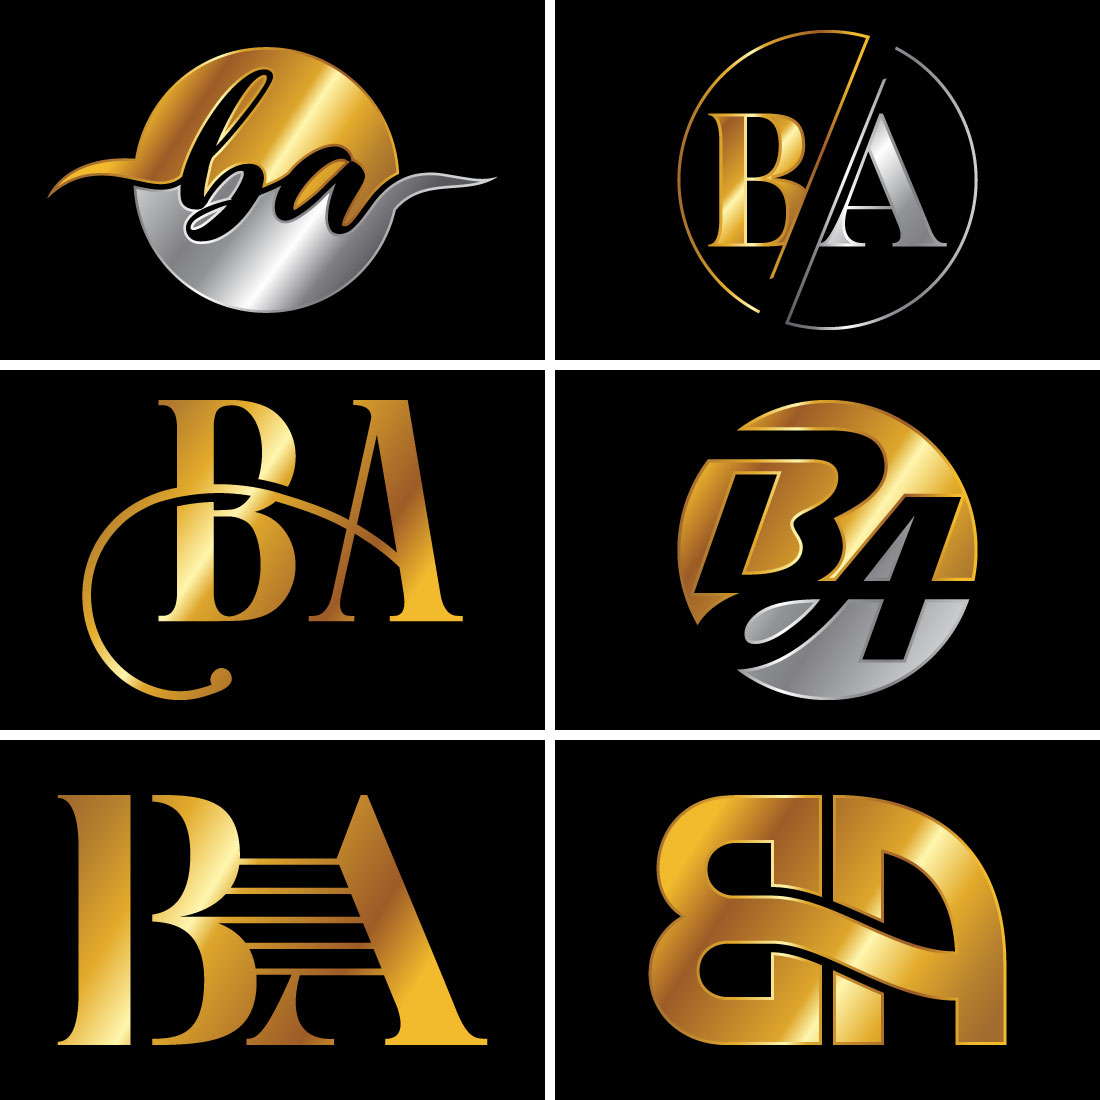 B A Initial Letter Logo Design cover image.